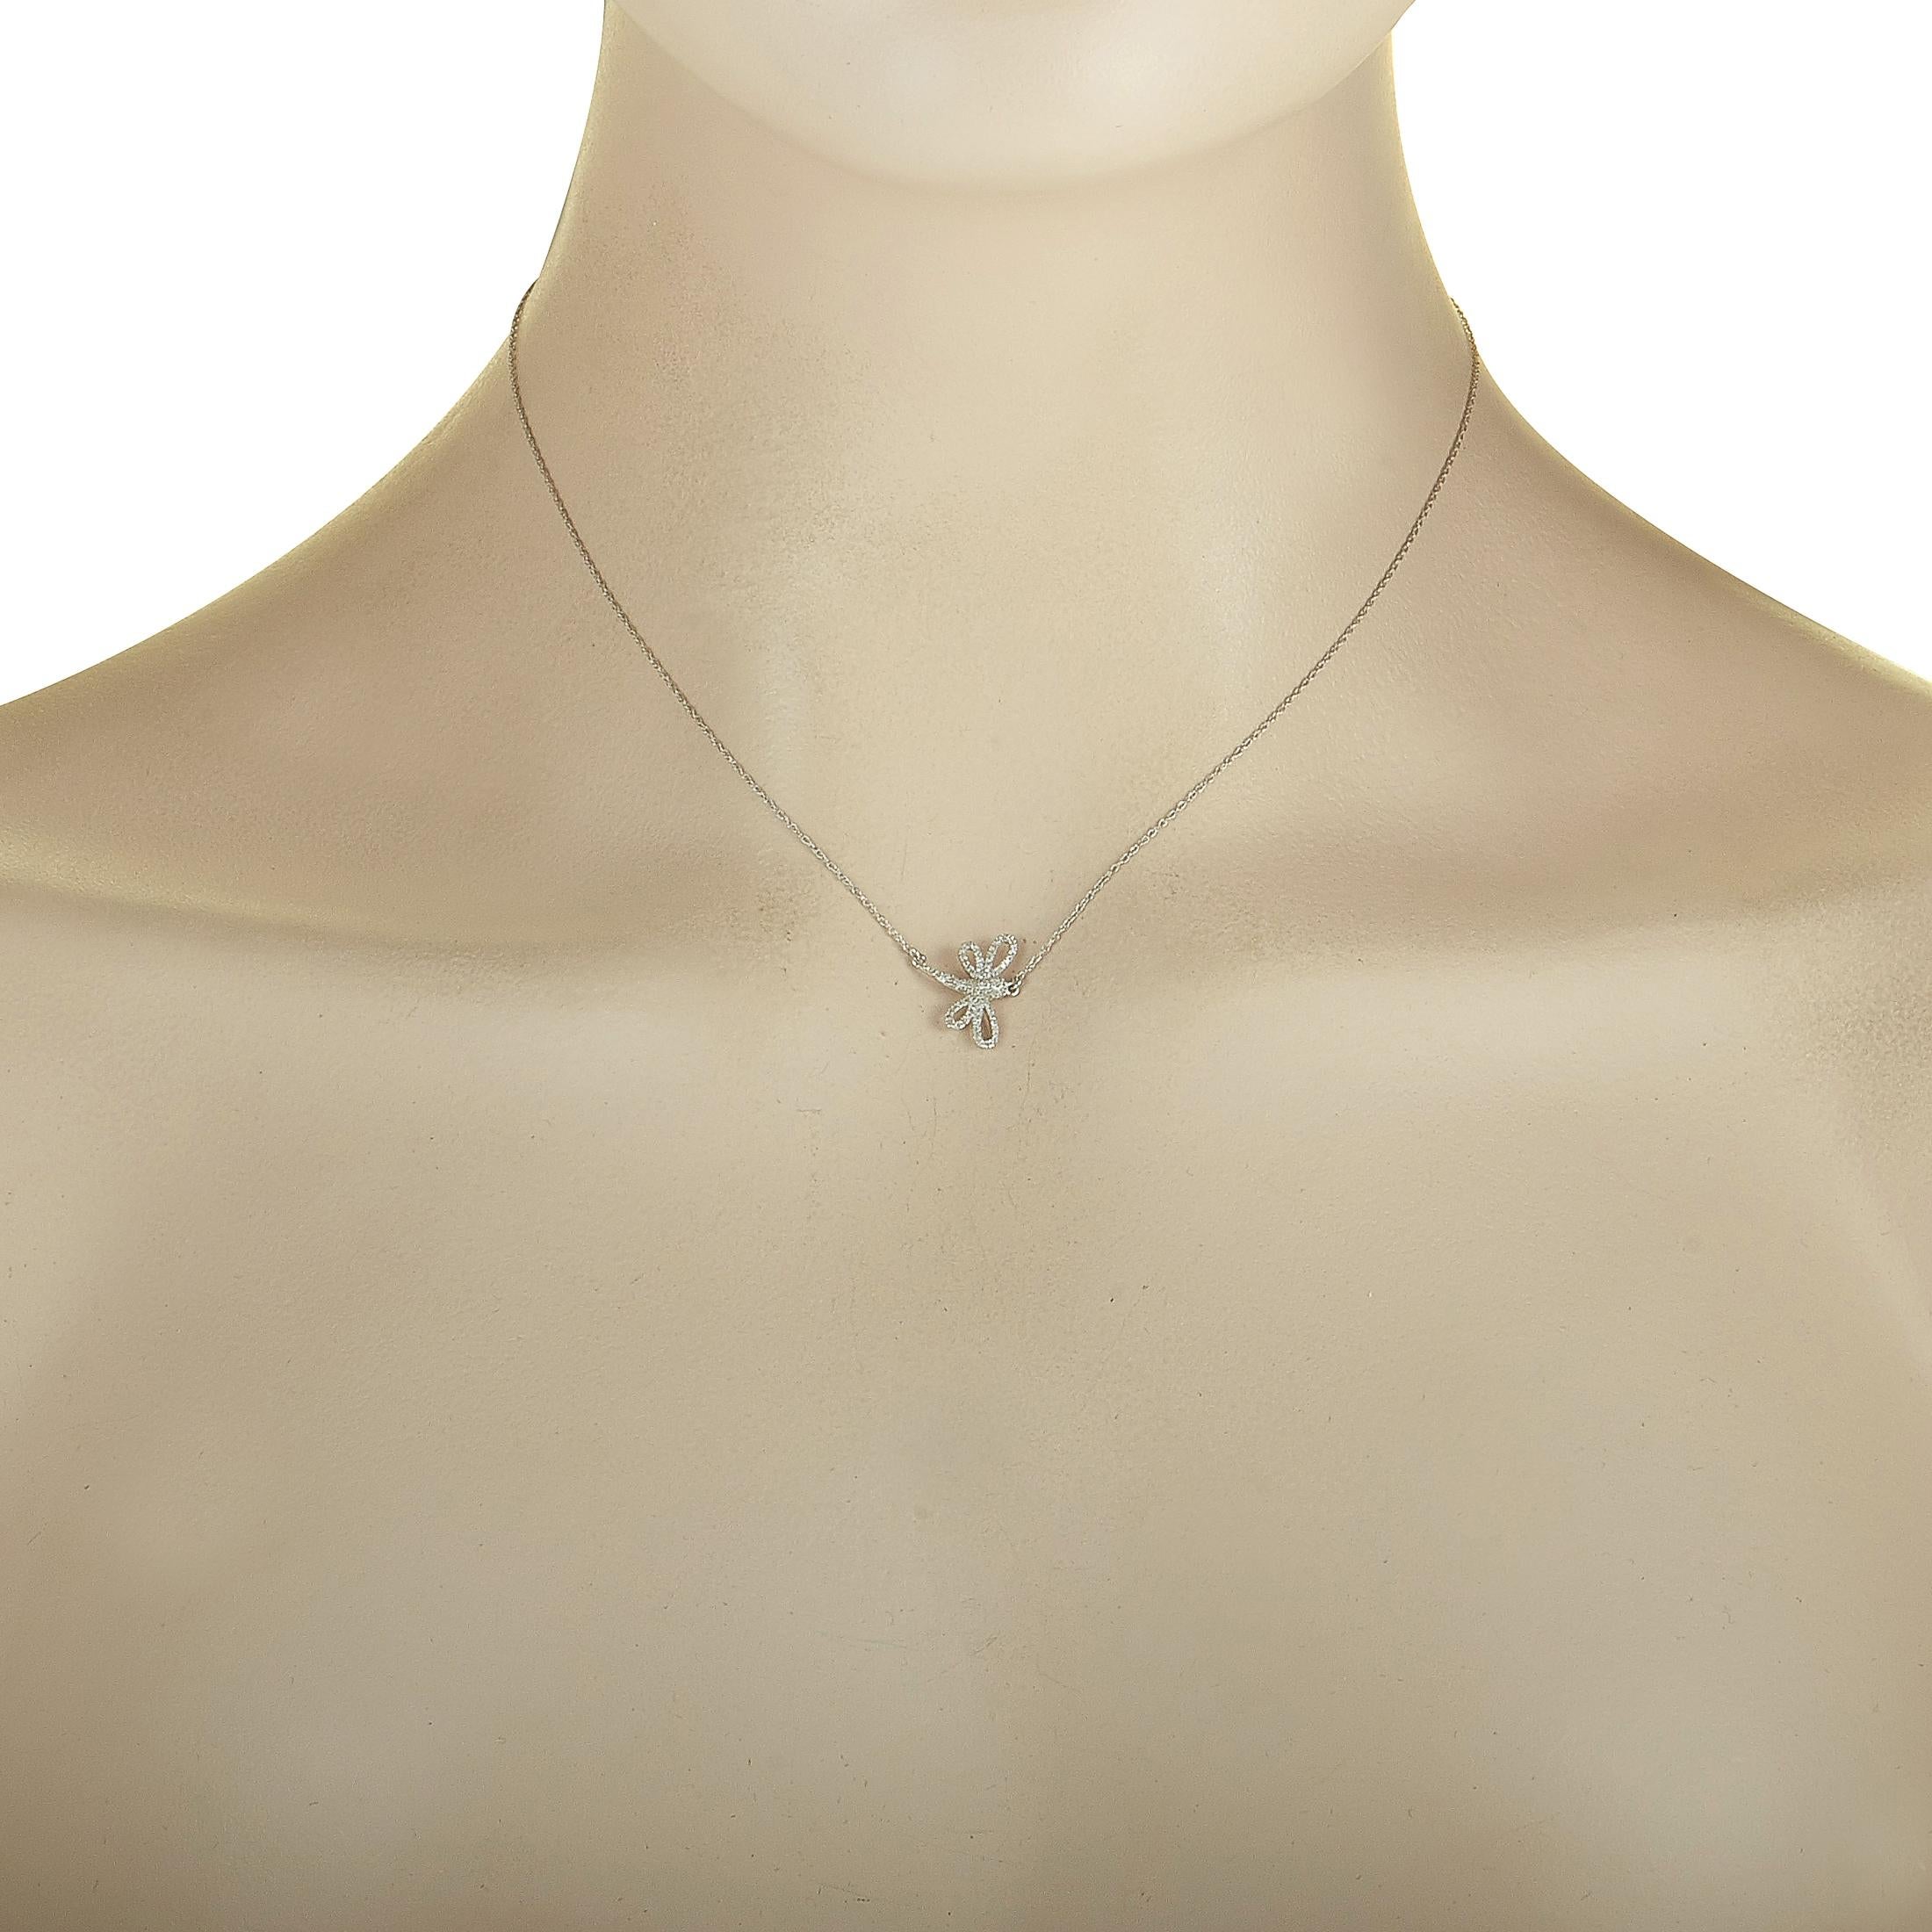 This LB Exclusive necklace is crafted from 14K white gold, boasting a 15” chain with spring ring closure and a dragonfly pendant that measures 0.50” in length and 0.50” in width. The necklace weighs 1.3 grams and is set with a total of 0.15 carats